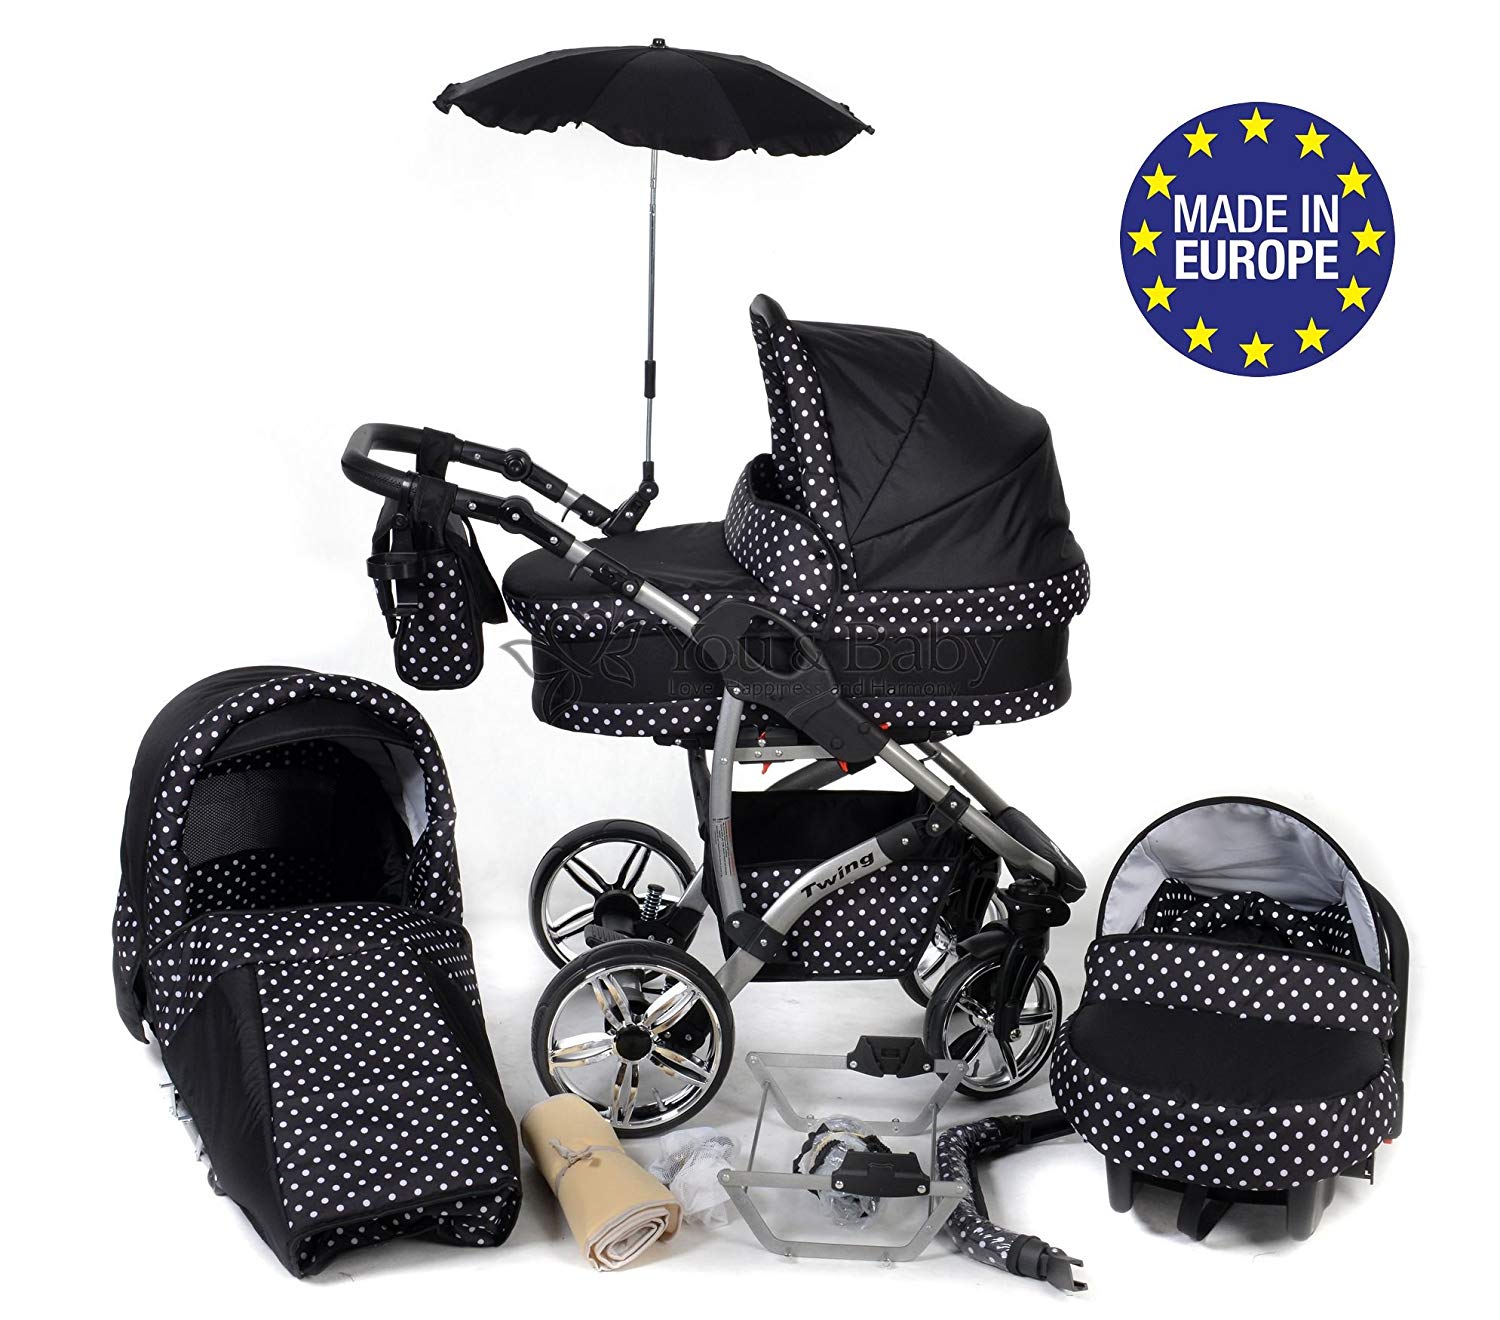 Twing – 3 in 1 Travel System Including Pushchair with Swivel Wheels, Car Seat, Pushchair & Accessories, Black and White Polka Dot Design